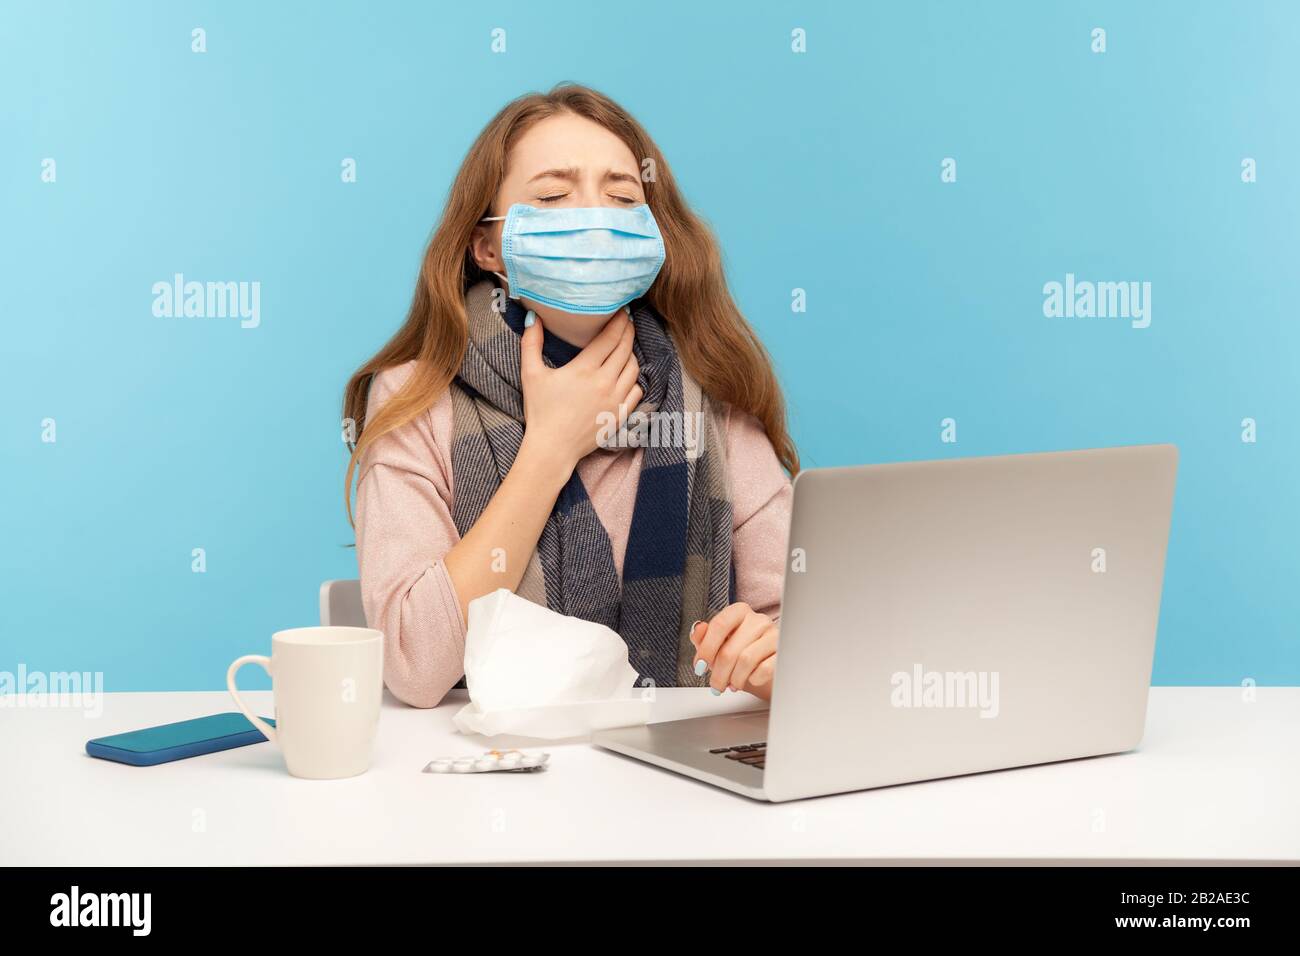 Sick girl in hygienic face mask sitting at desk with laptop, holding painful neck suffering sore throat, ill freelance woman with flu working from hom Stock Photo